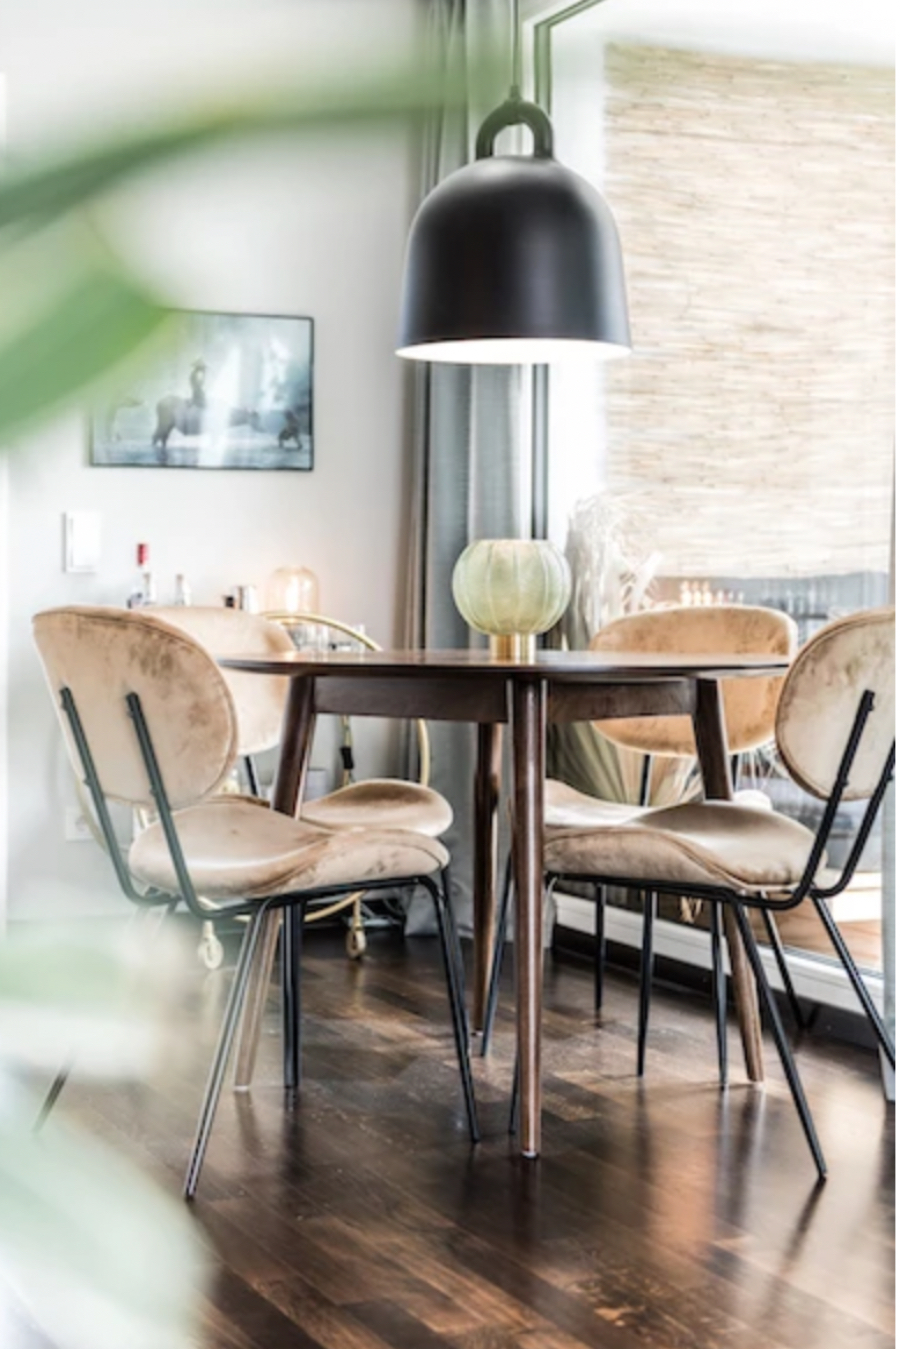 Casa Coulon- Interior Design Inspirations for Your Home APARTMENT MÜNCHEN dinning table, with beige dinning chairs and a wood rounded dinning table  casa coulon Casa Coulon- Interior Design Inspirations for Your Home Captura de ecra   2021 11 19 a  s 15